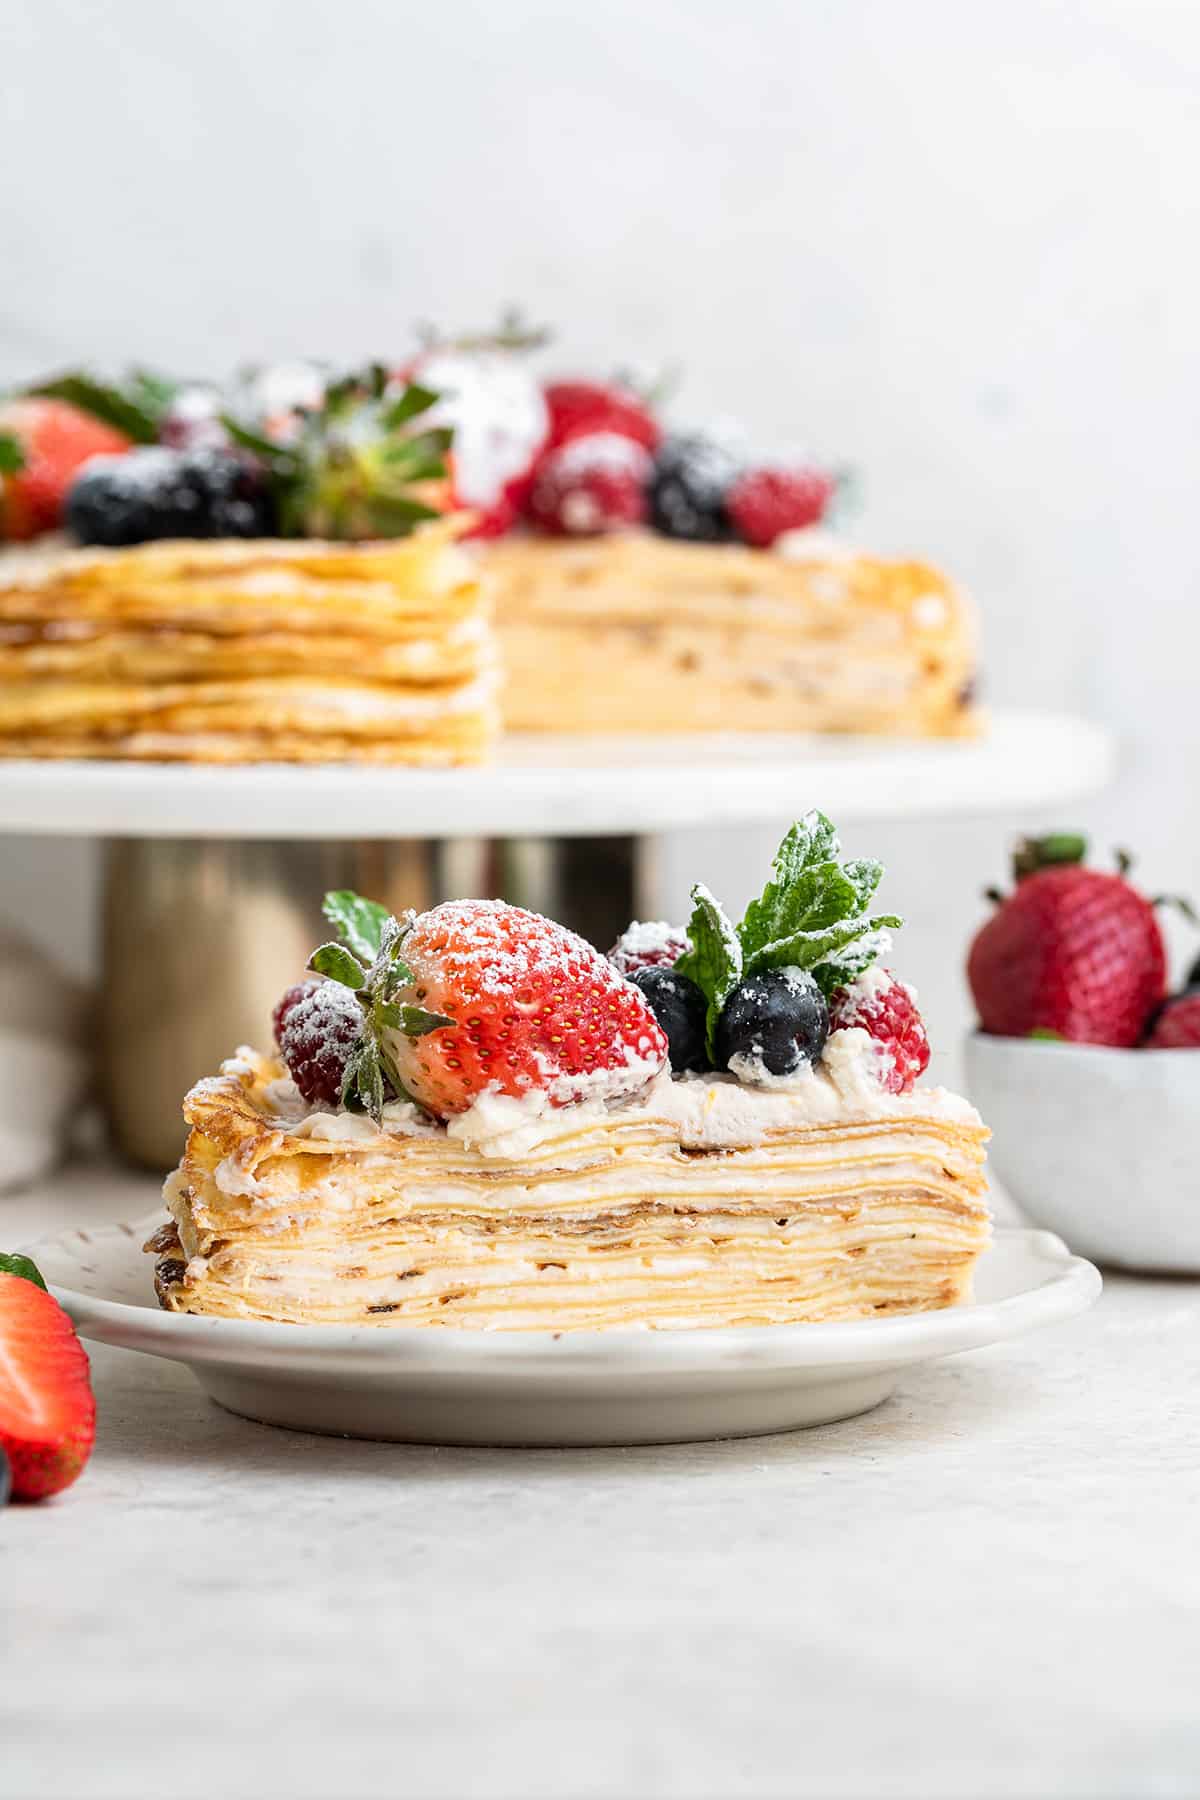 A plate with a slice of crepe cake covered in berries and mint, with whole crepe cake ion a cake stand in the background